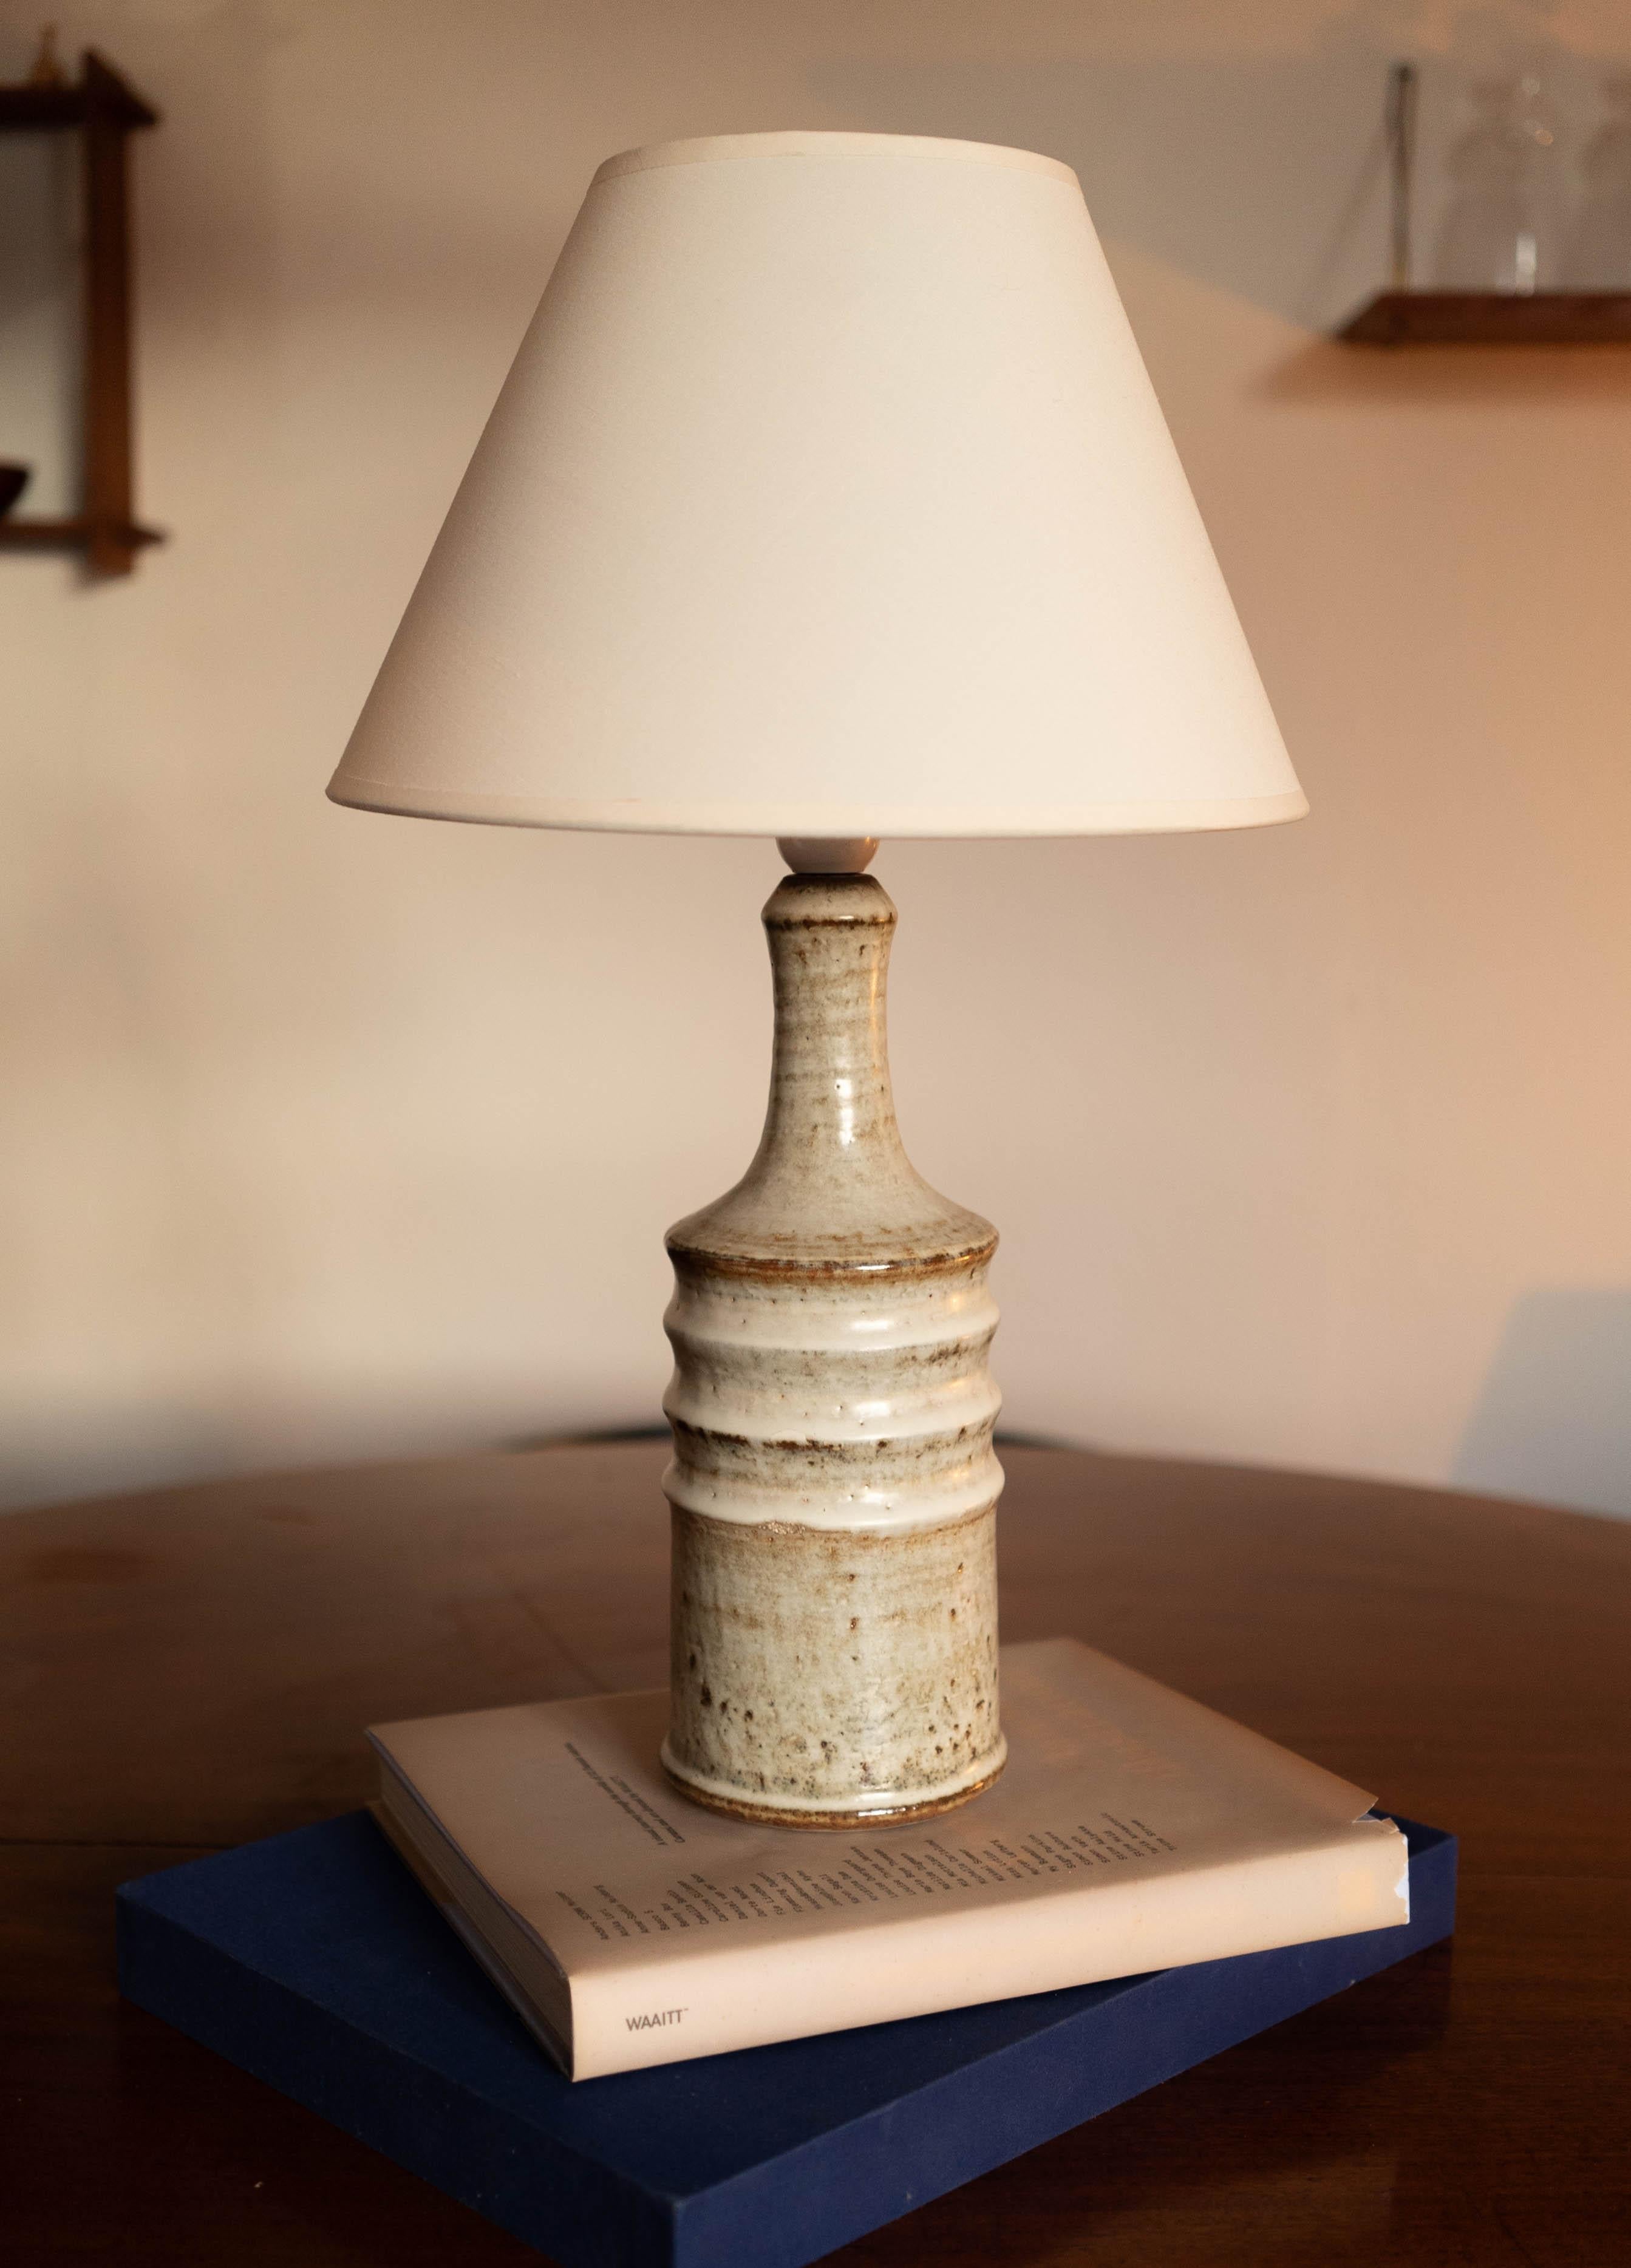 Small table lamp by Einar Johansen for Søholm Stentøj, Denmark, 1960s.

Stamped and signed on the base.

Sold without lampshade. Height includes socket. Fully functional and in beautiful condition.